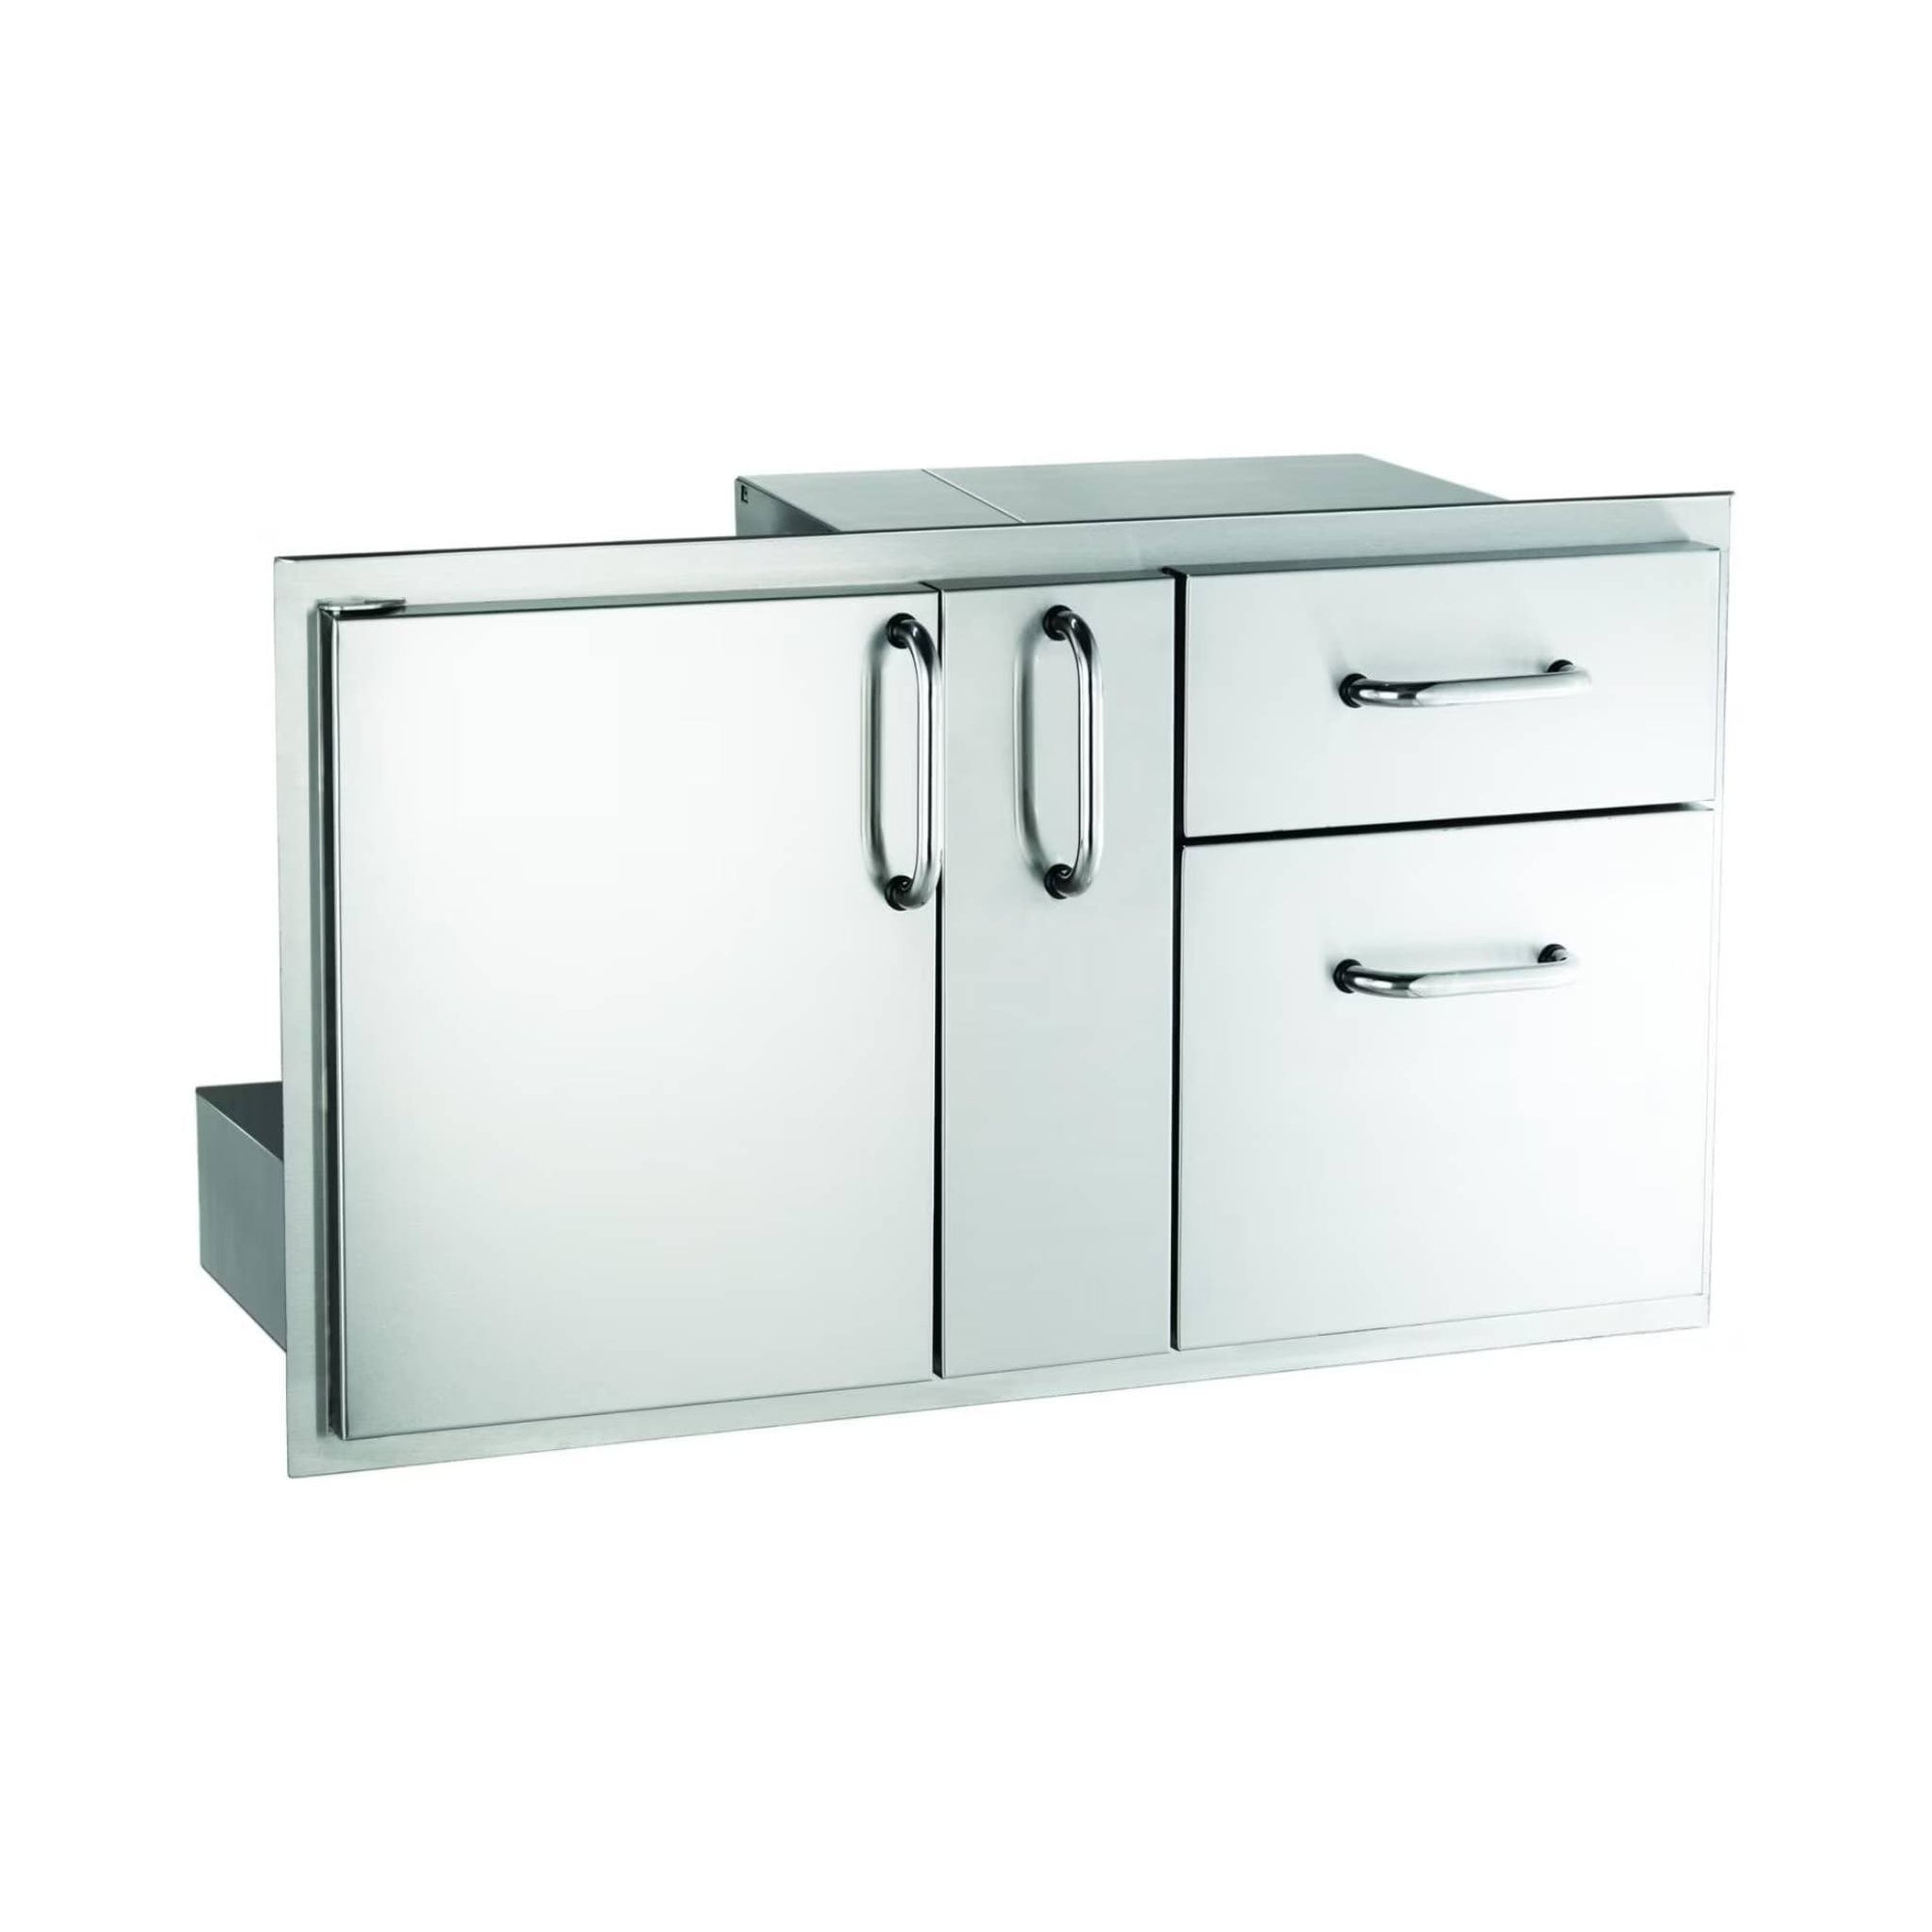 AOG 36" Access Door With Platter Storage And Double Drawer - Culinary Hardware